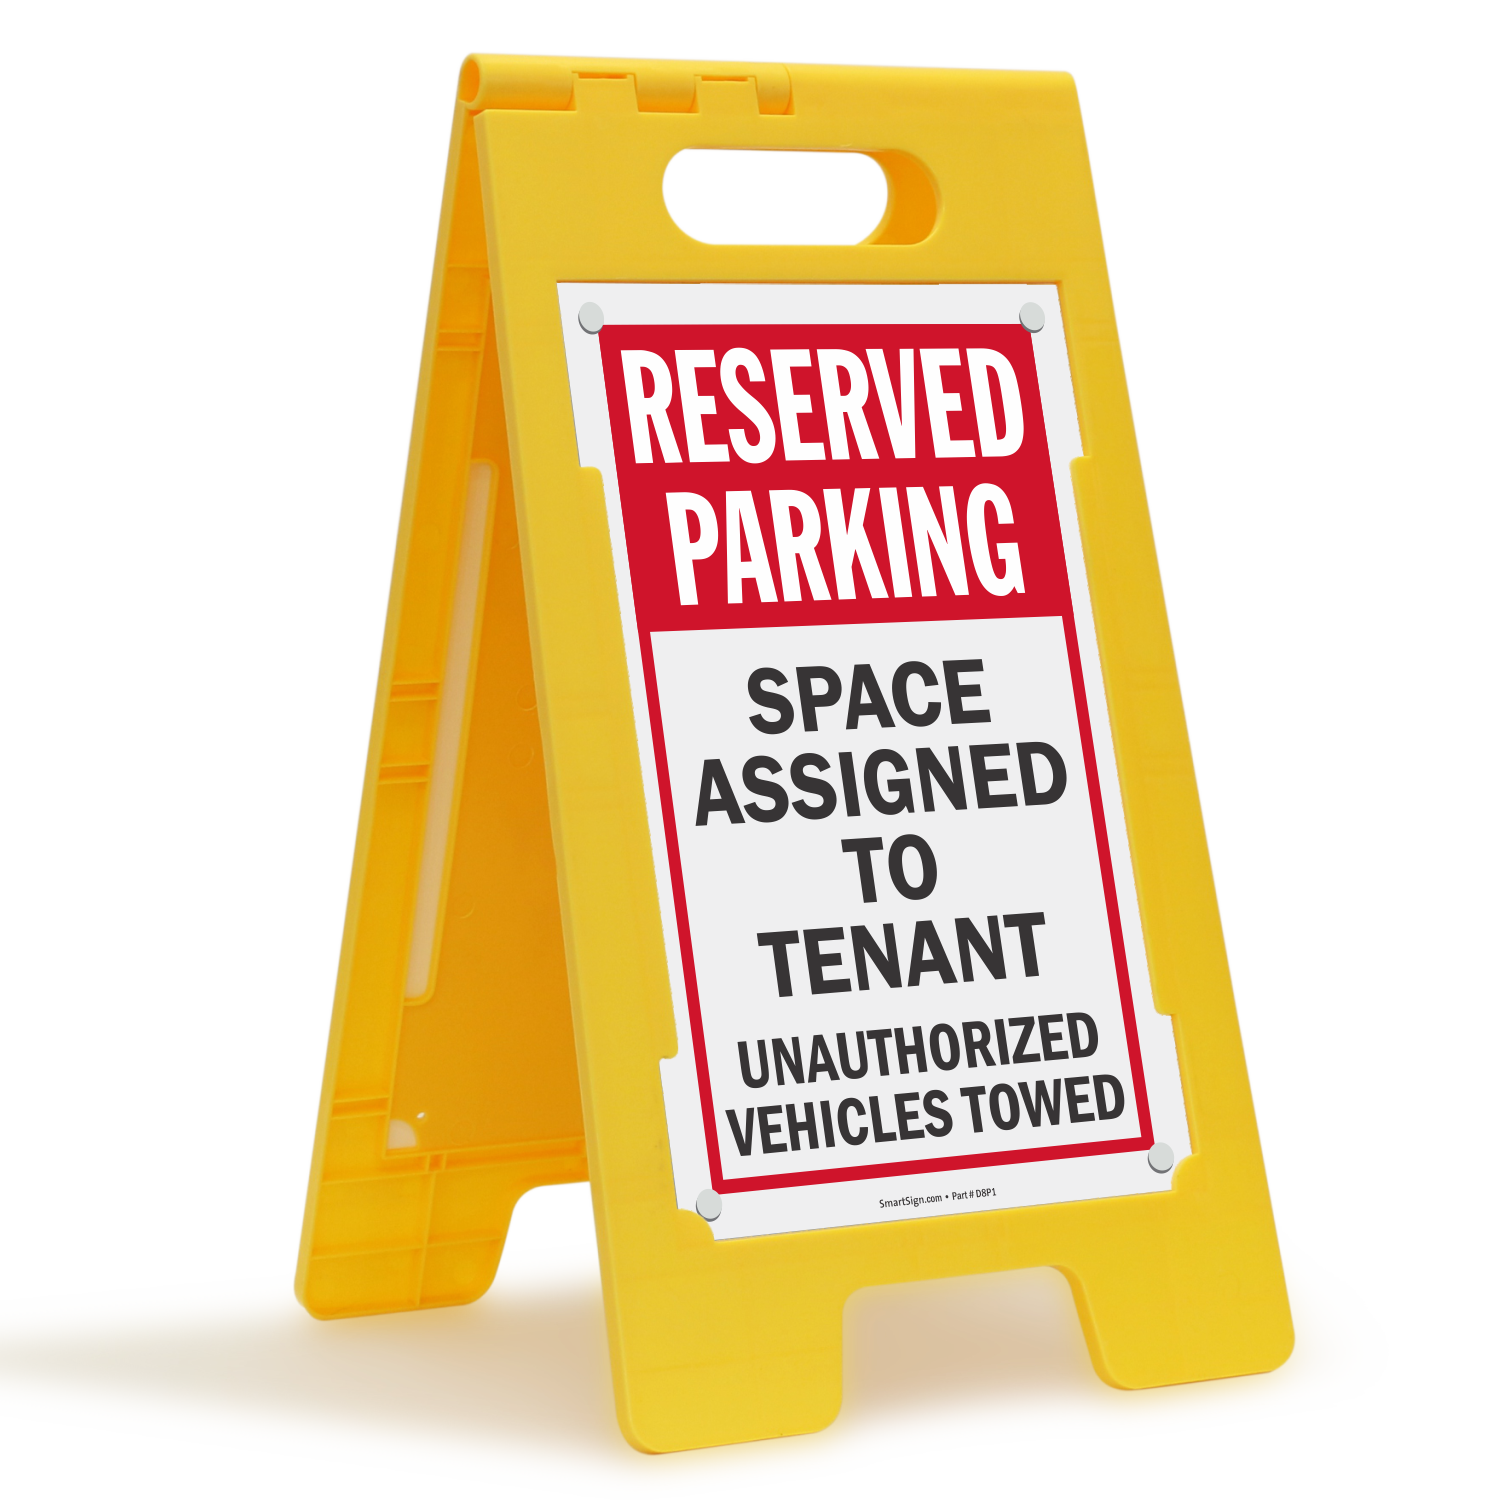 reserved parking space images